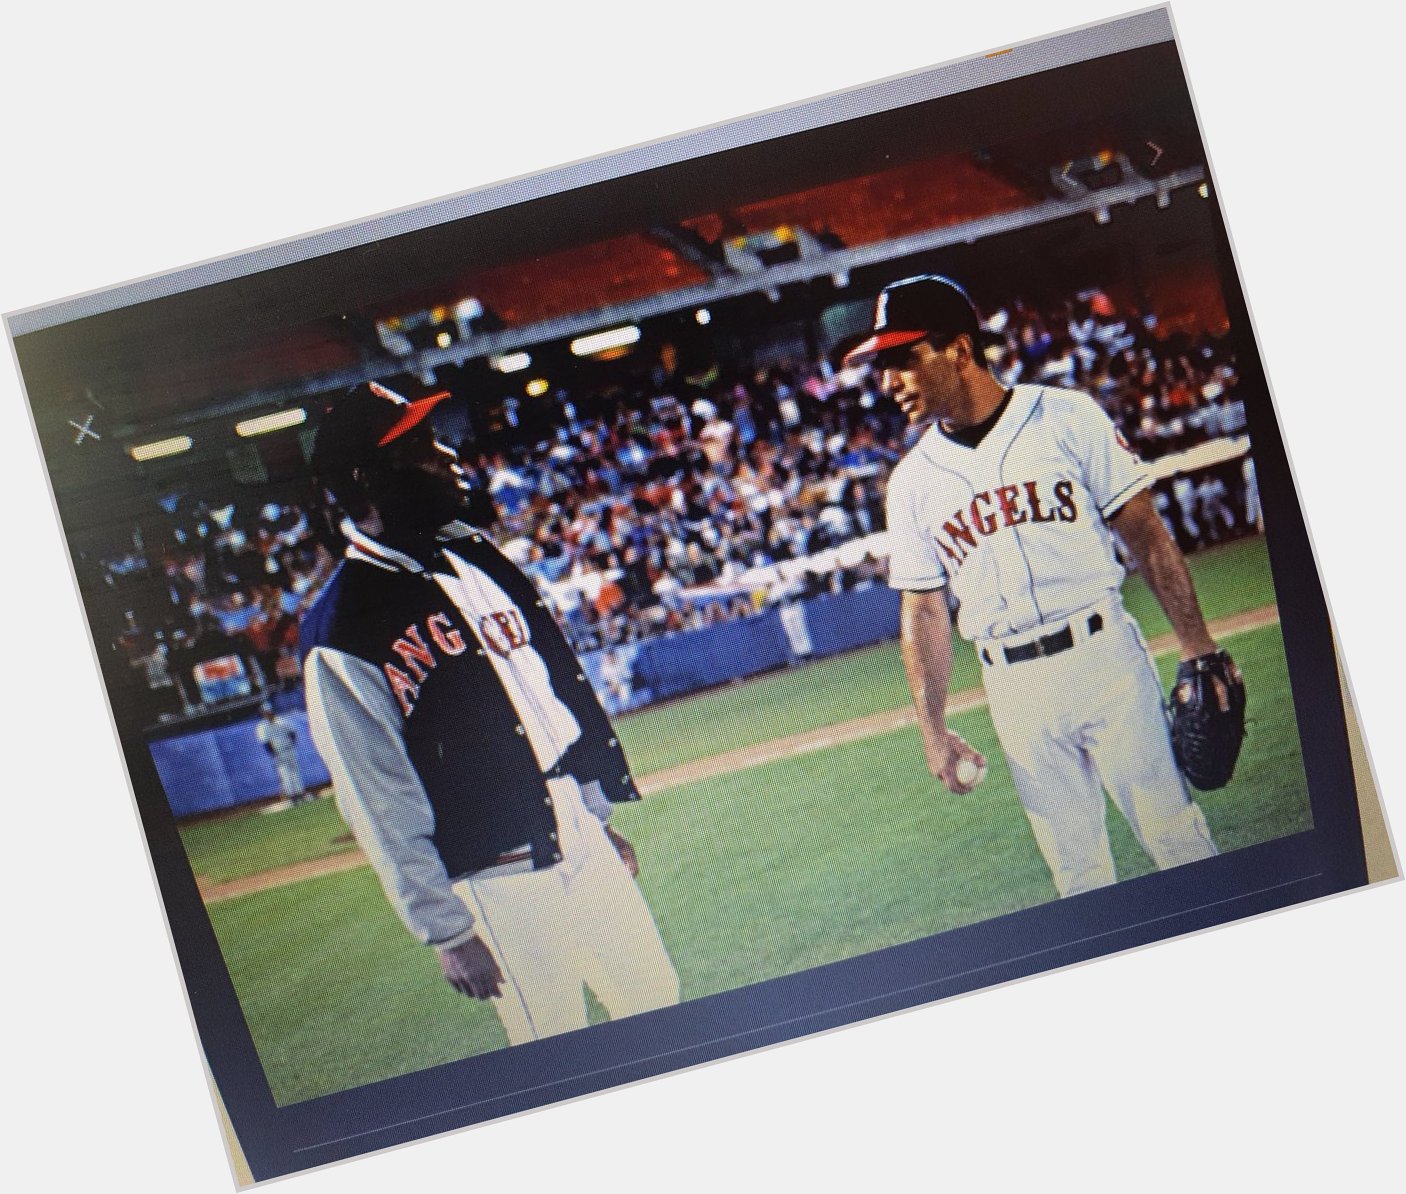 Happy Birthday Danny Glover! I love the movie \"Angels in the outfield \"  